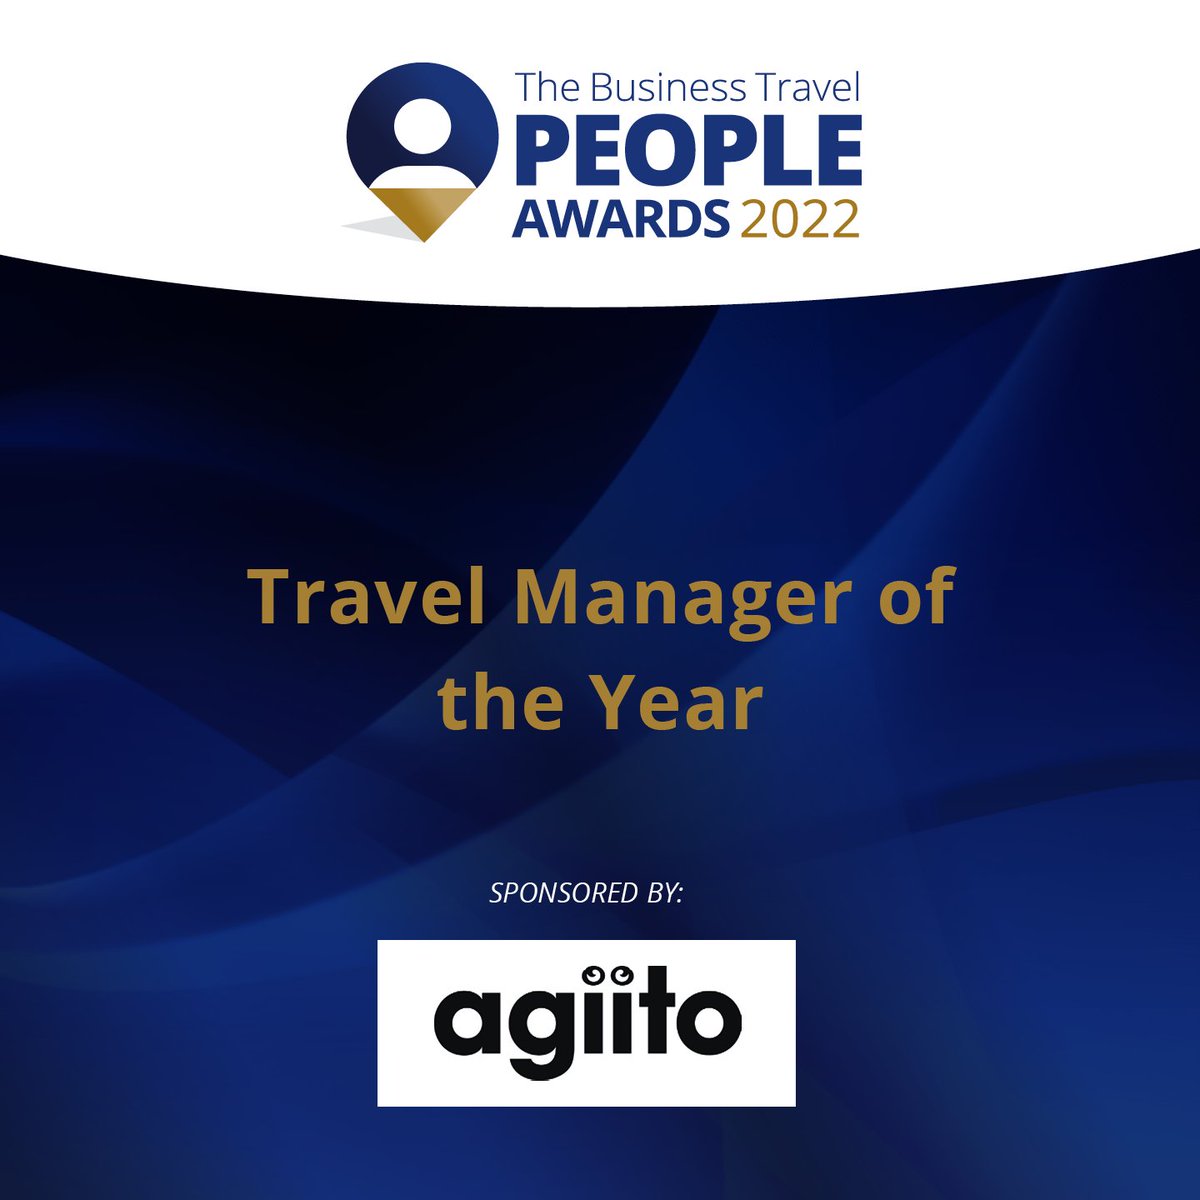 Travel Manager of the Year is kindly sponsored by Agiito #TBTPA2022 @team_agiito